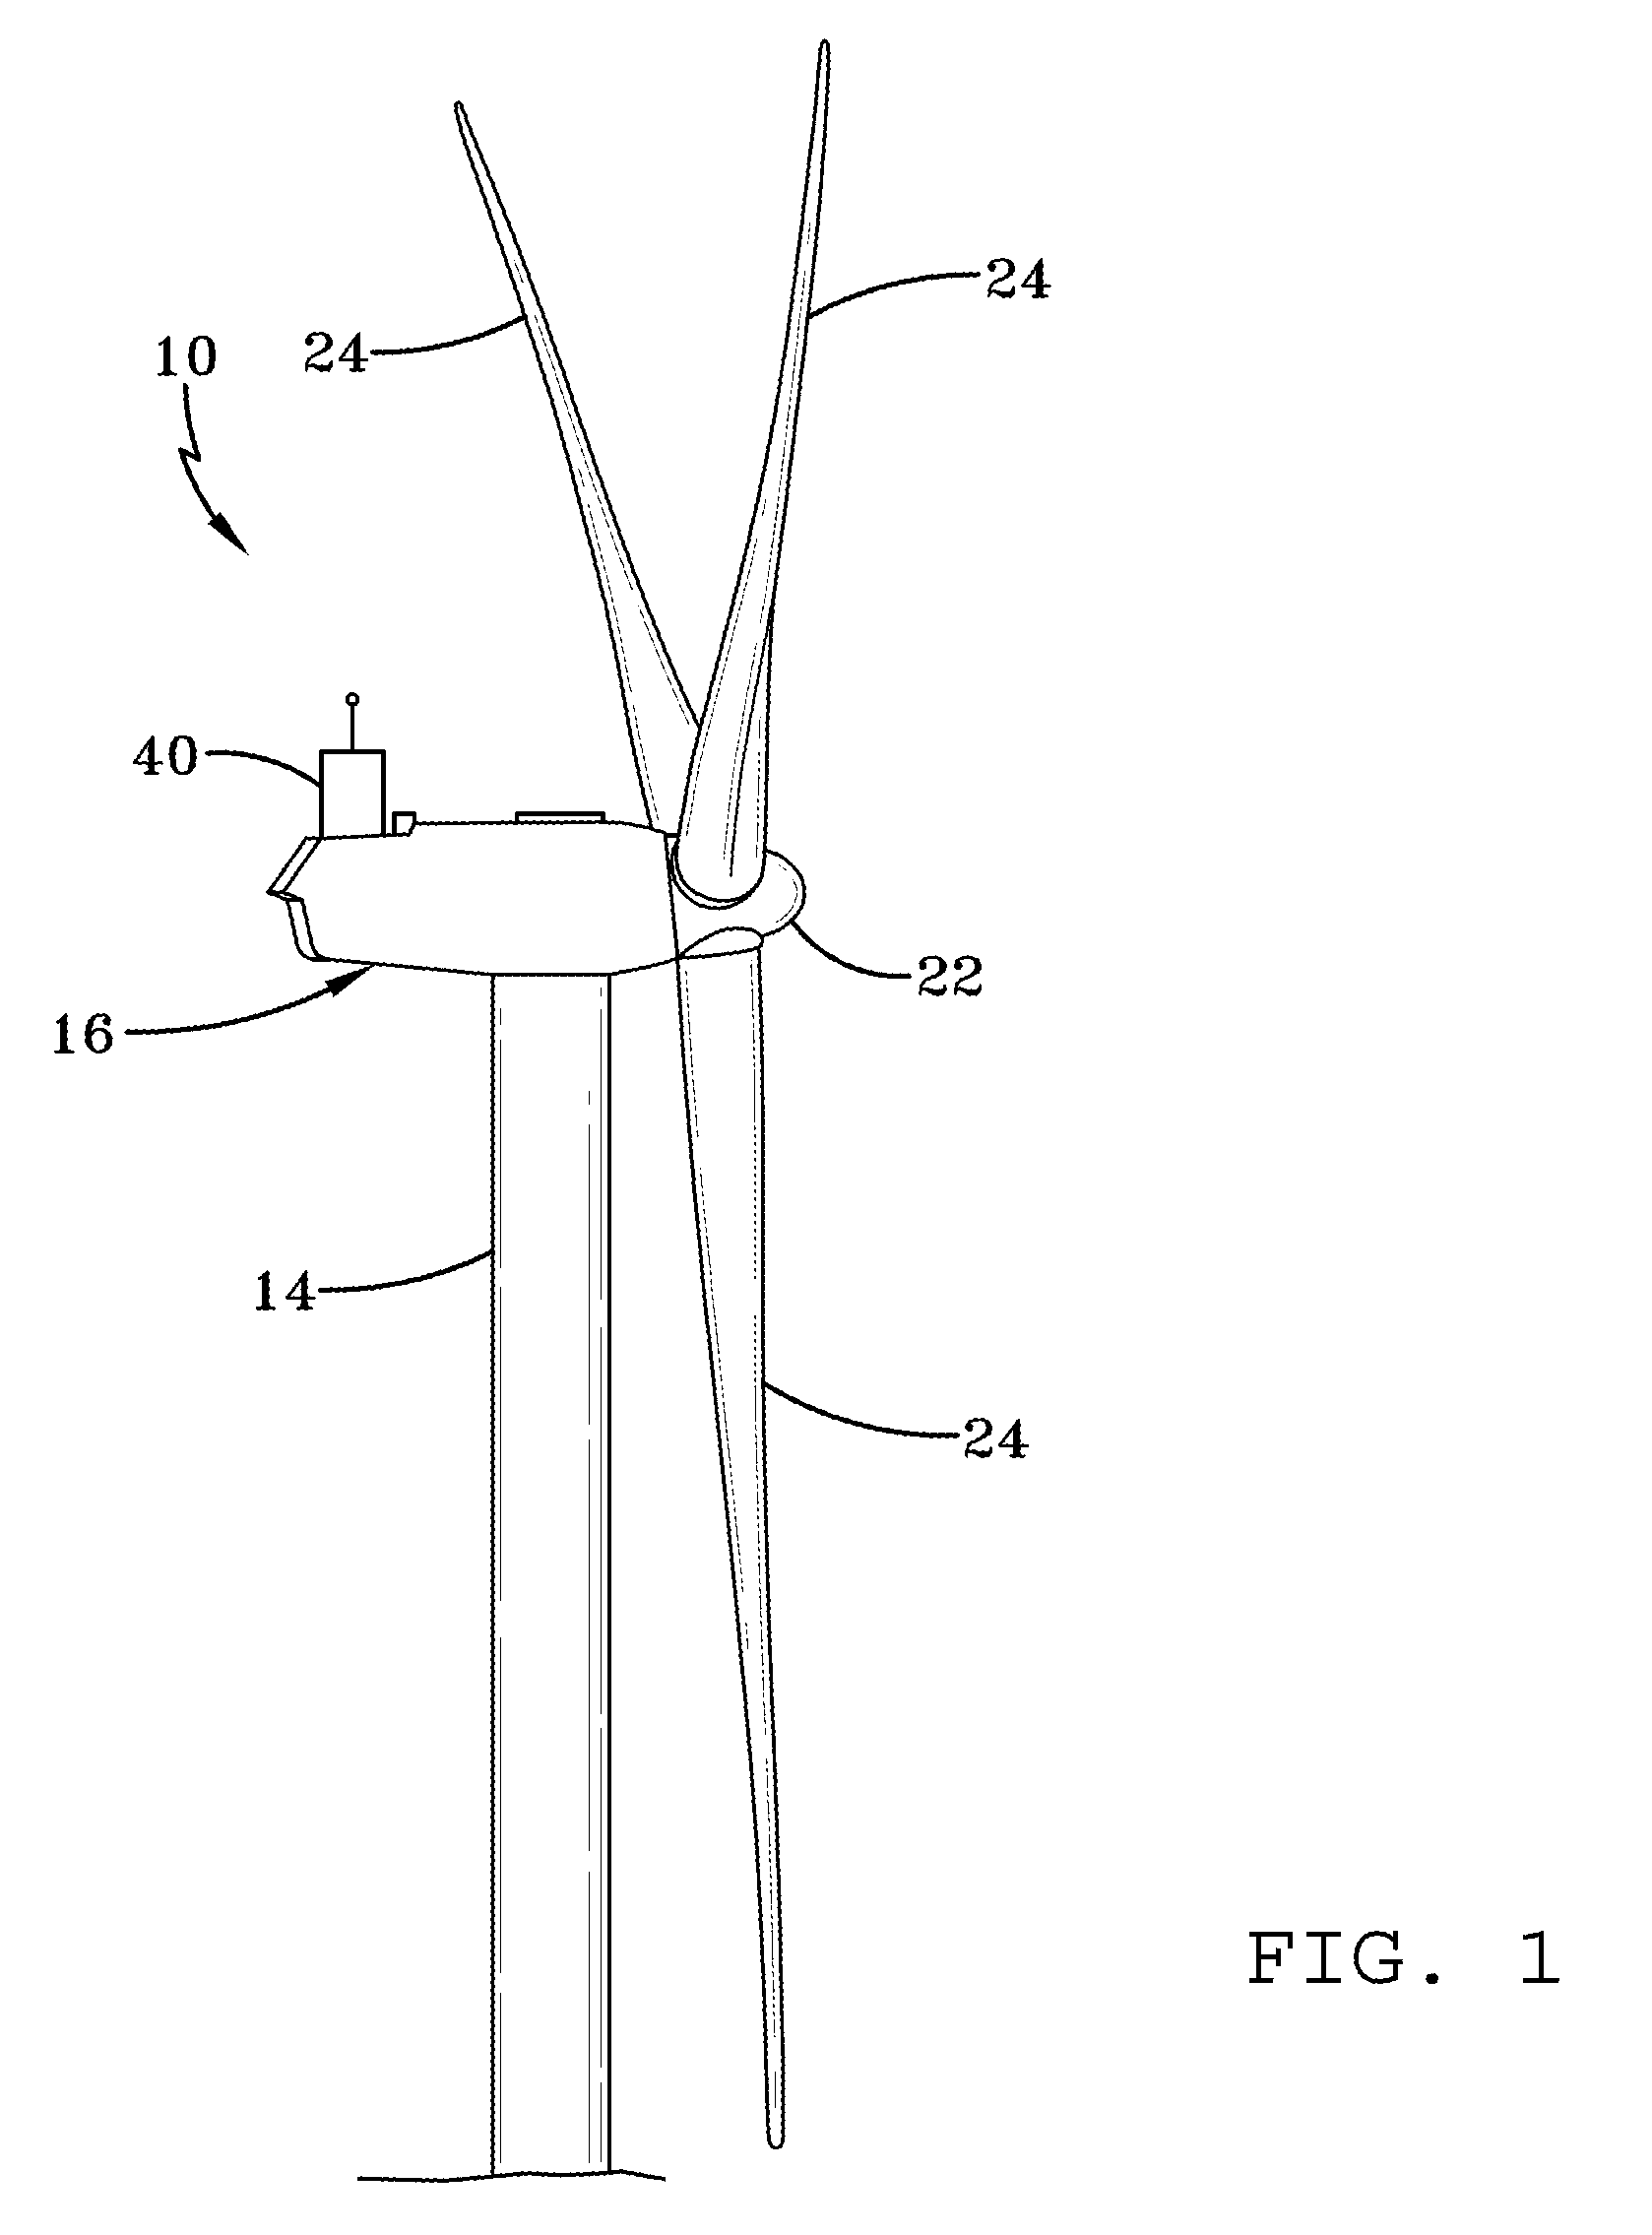 System and method for wind turbine noise control and damage detection